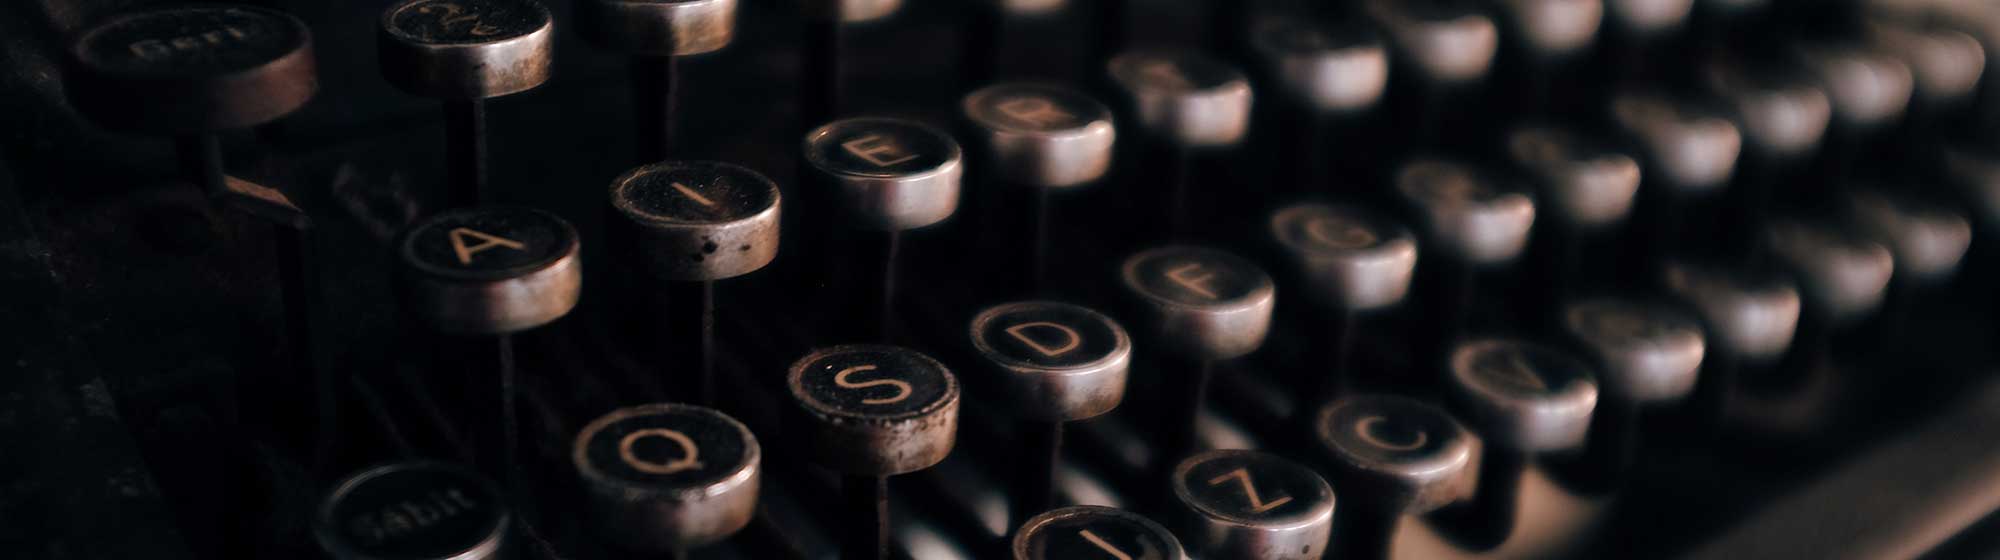 Picture of a typewriter